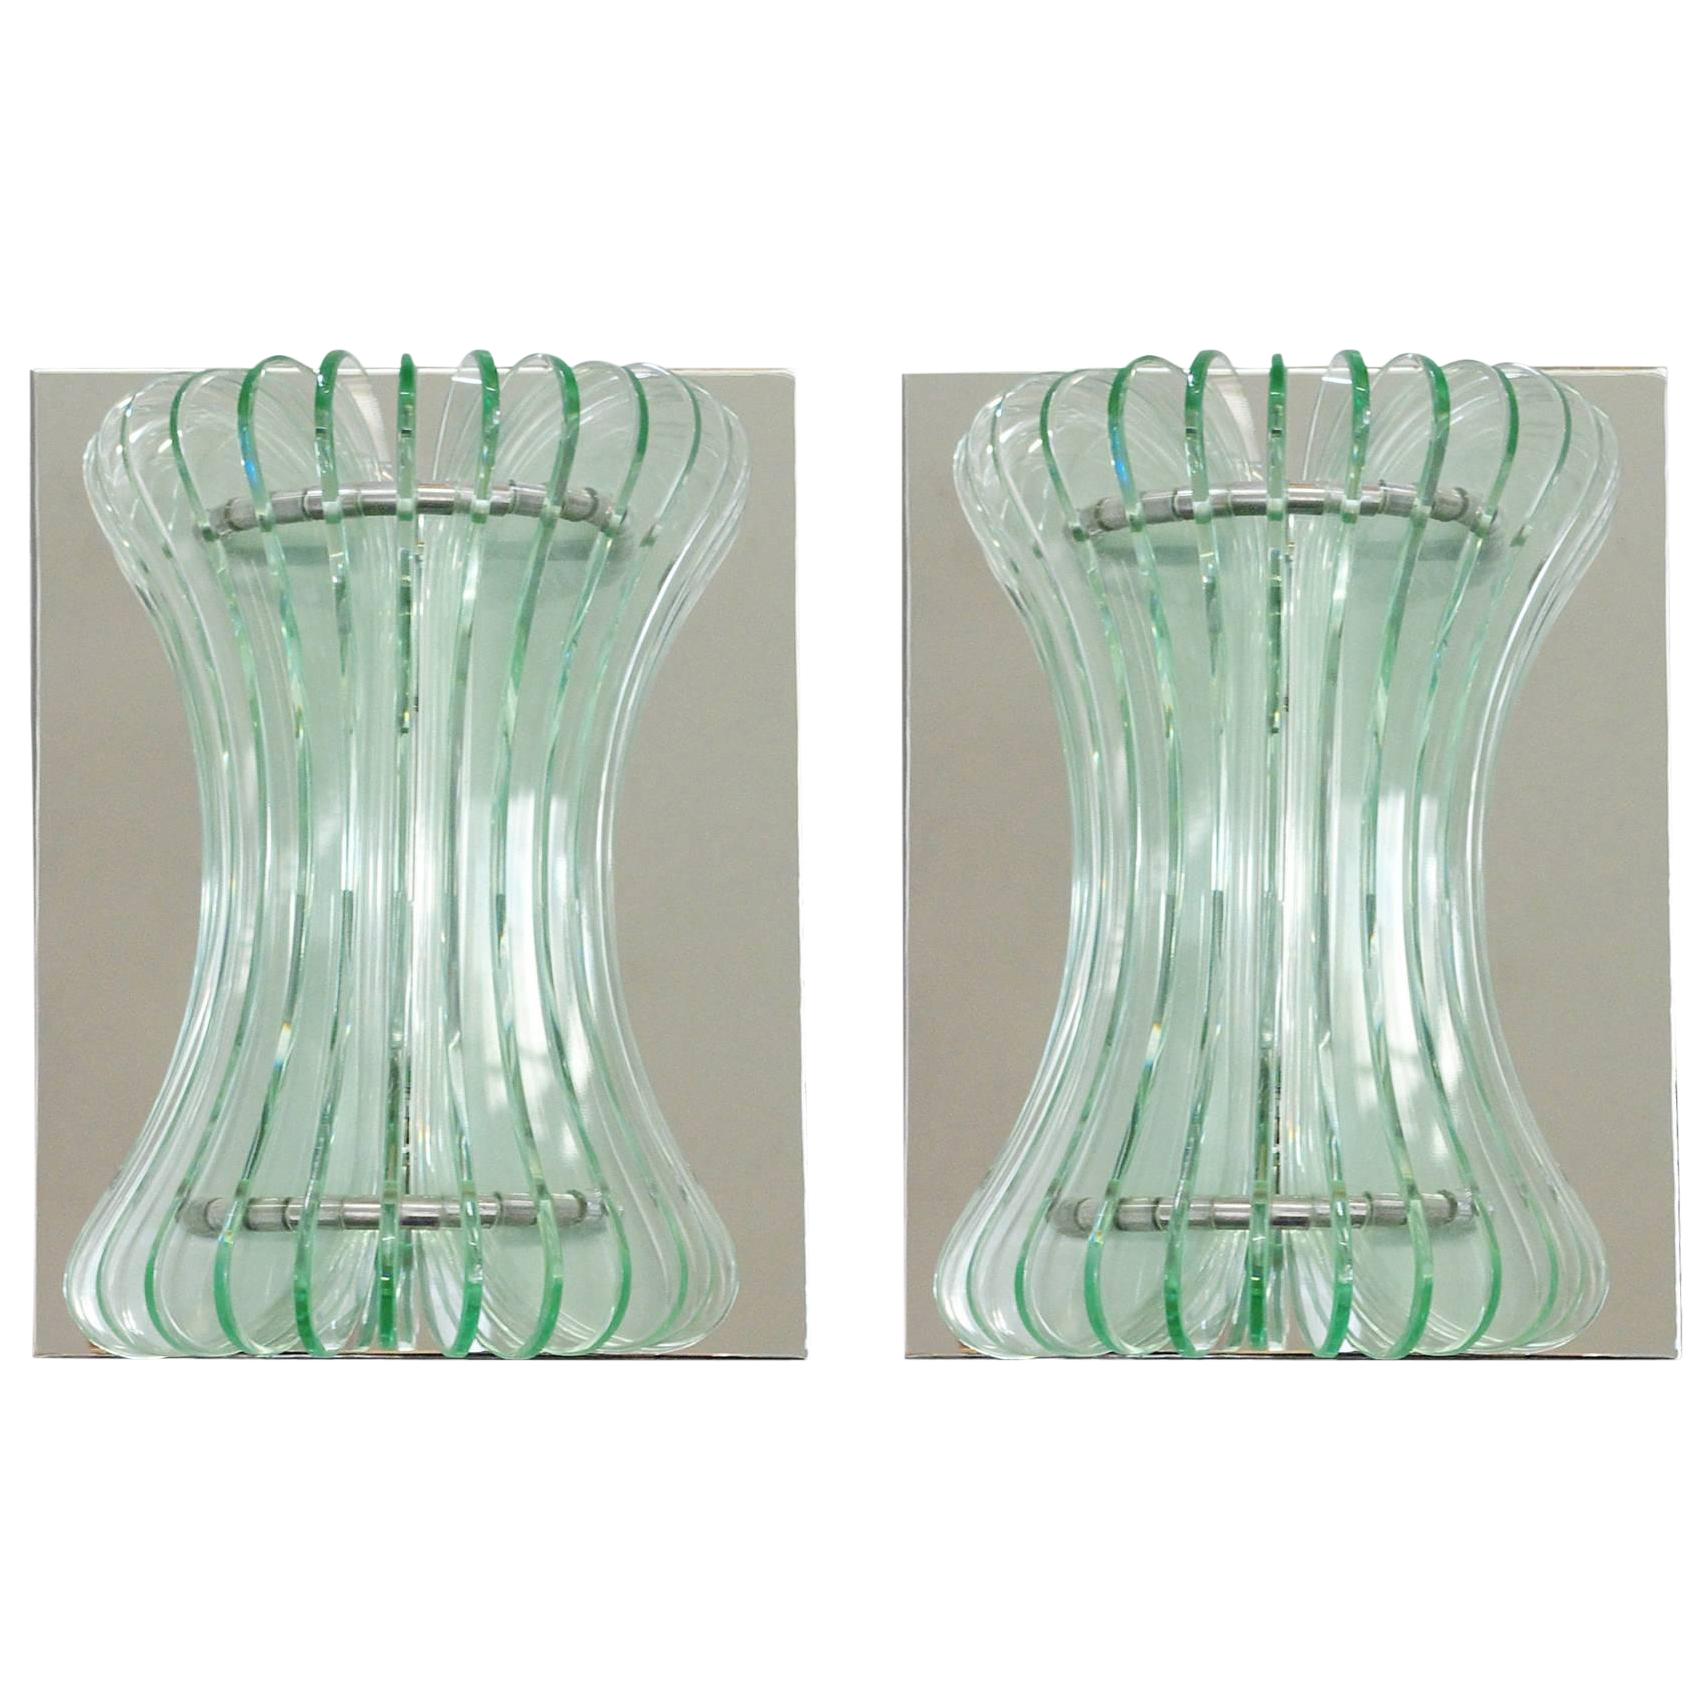 Pair of Vintage Italian Sconces w/ Beveled Glass Designed by Cristal Arte, 1960s